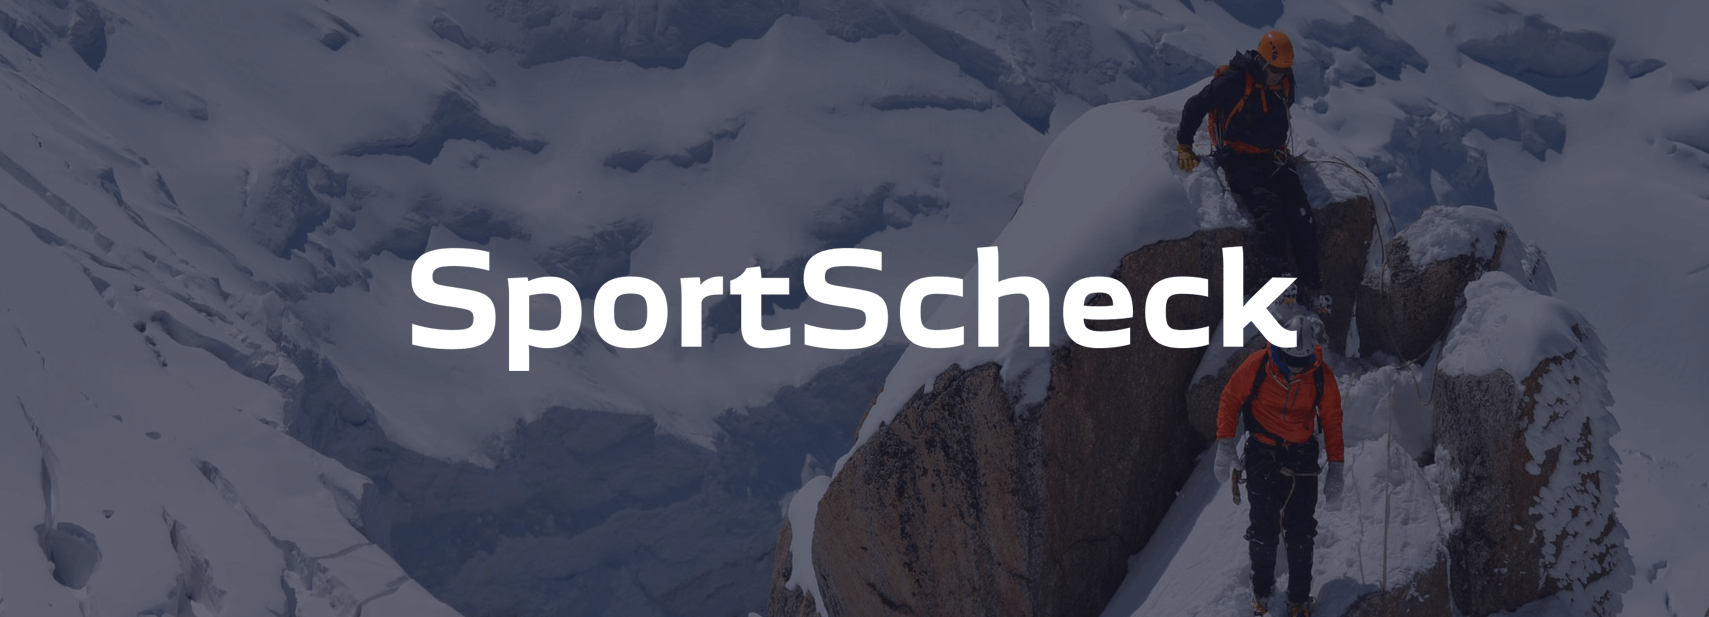 SportScheck conquers the sports industry in the DACH region with Mopinion